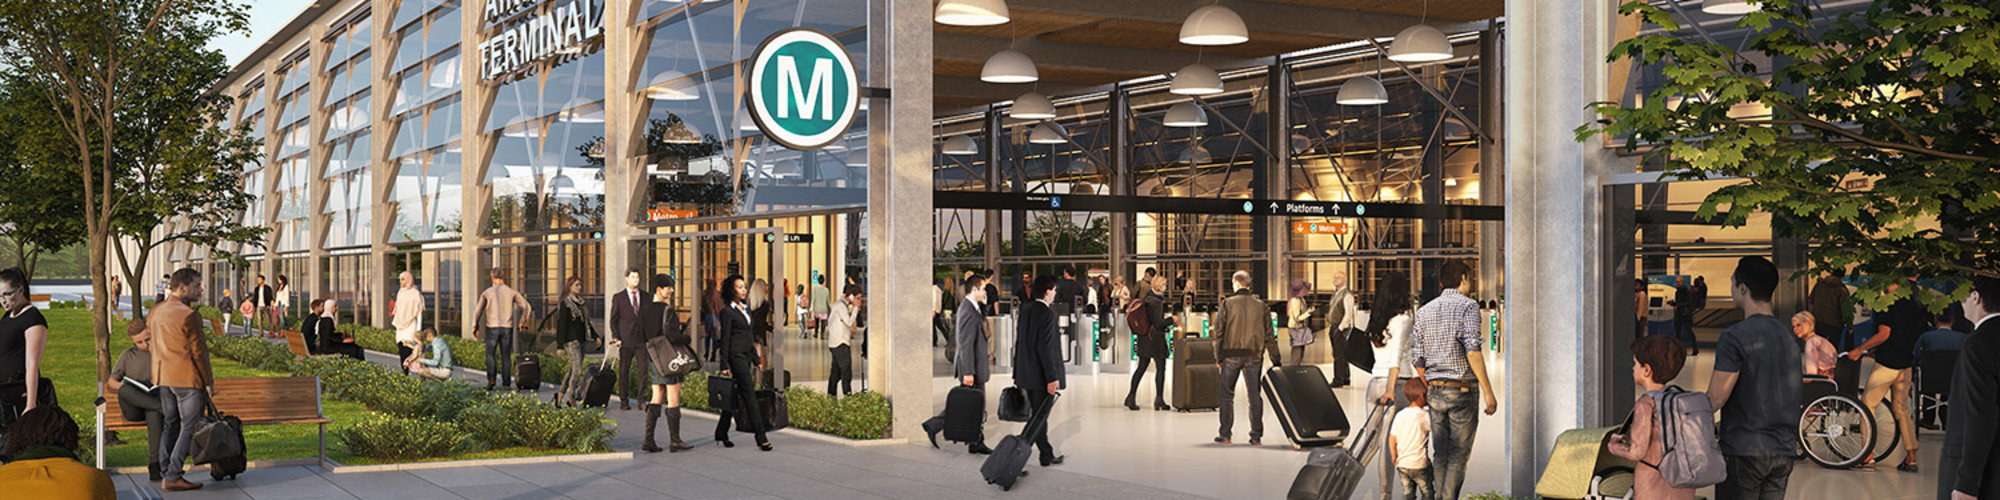 An artist’s impression of the Airport Terminal Station, being delivered as part of the Sydney Metro – Western Sydney Airport project. Airport Terminal Station as viewed from northern side of the station.